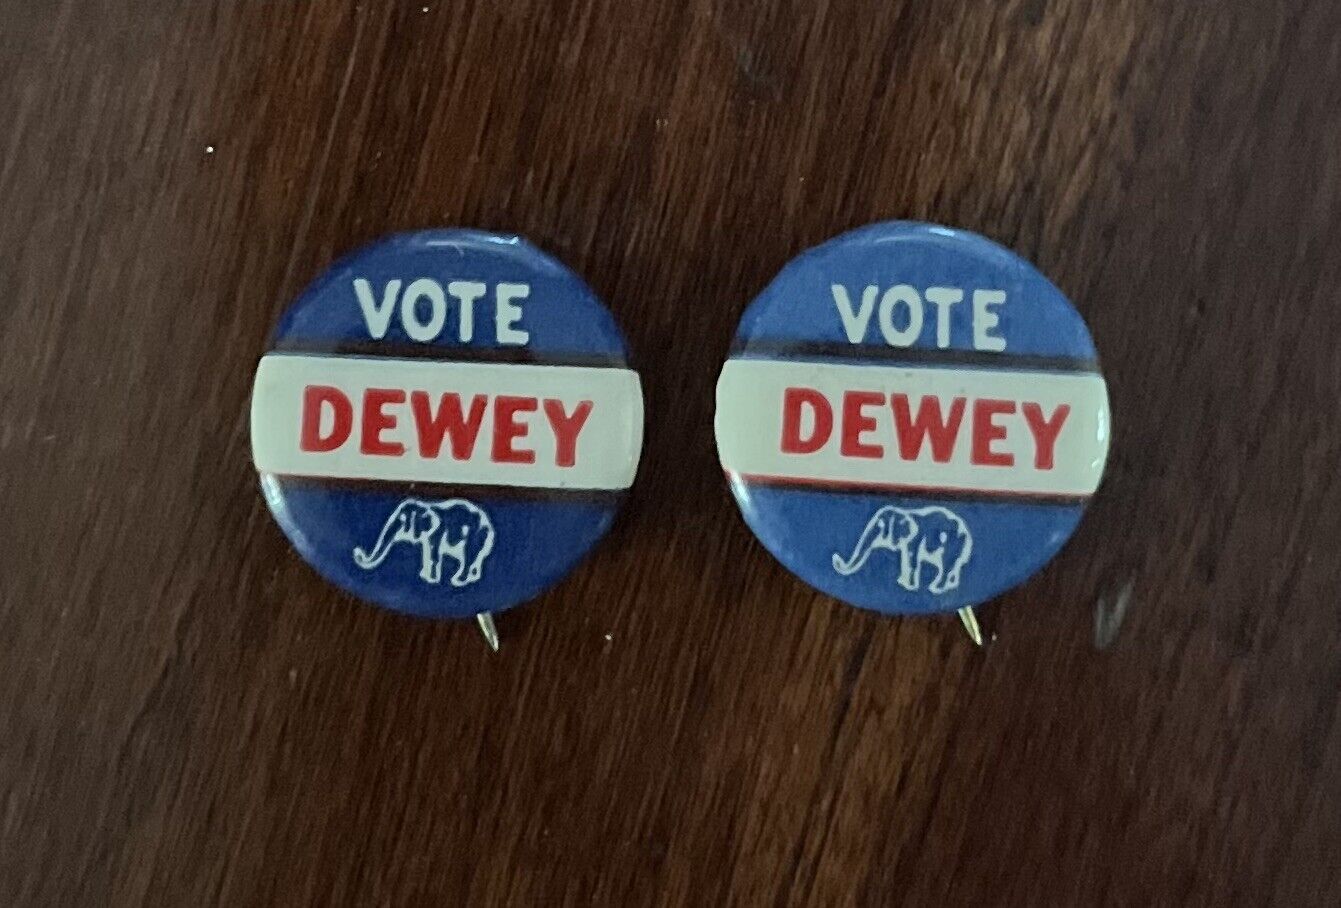 Thomas Dewey 3/4” Campaign Buttons (2) 1944 Pinback Pins Both Included